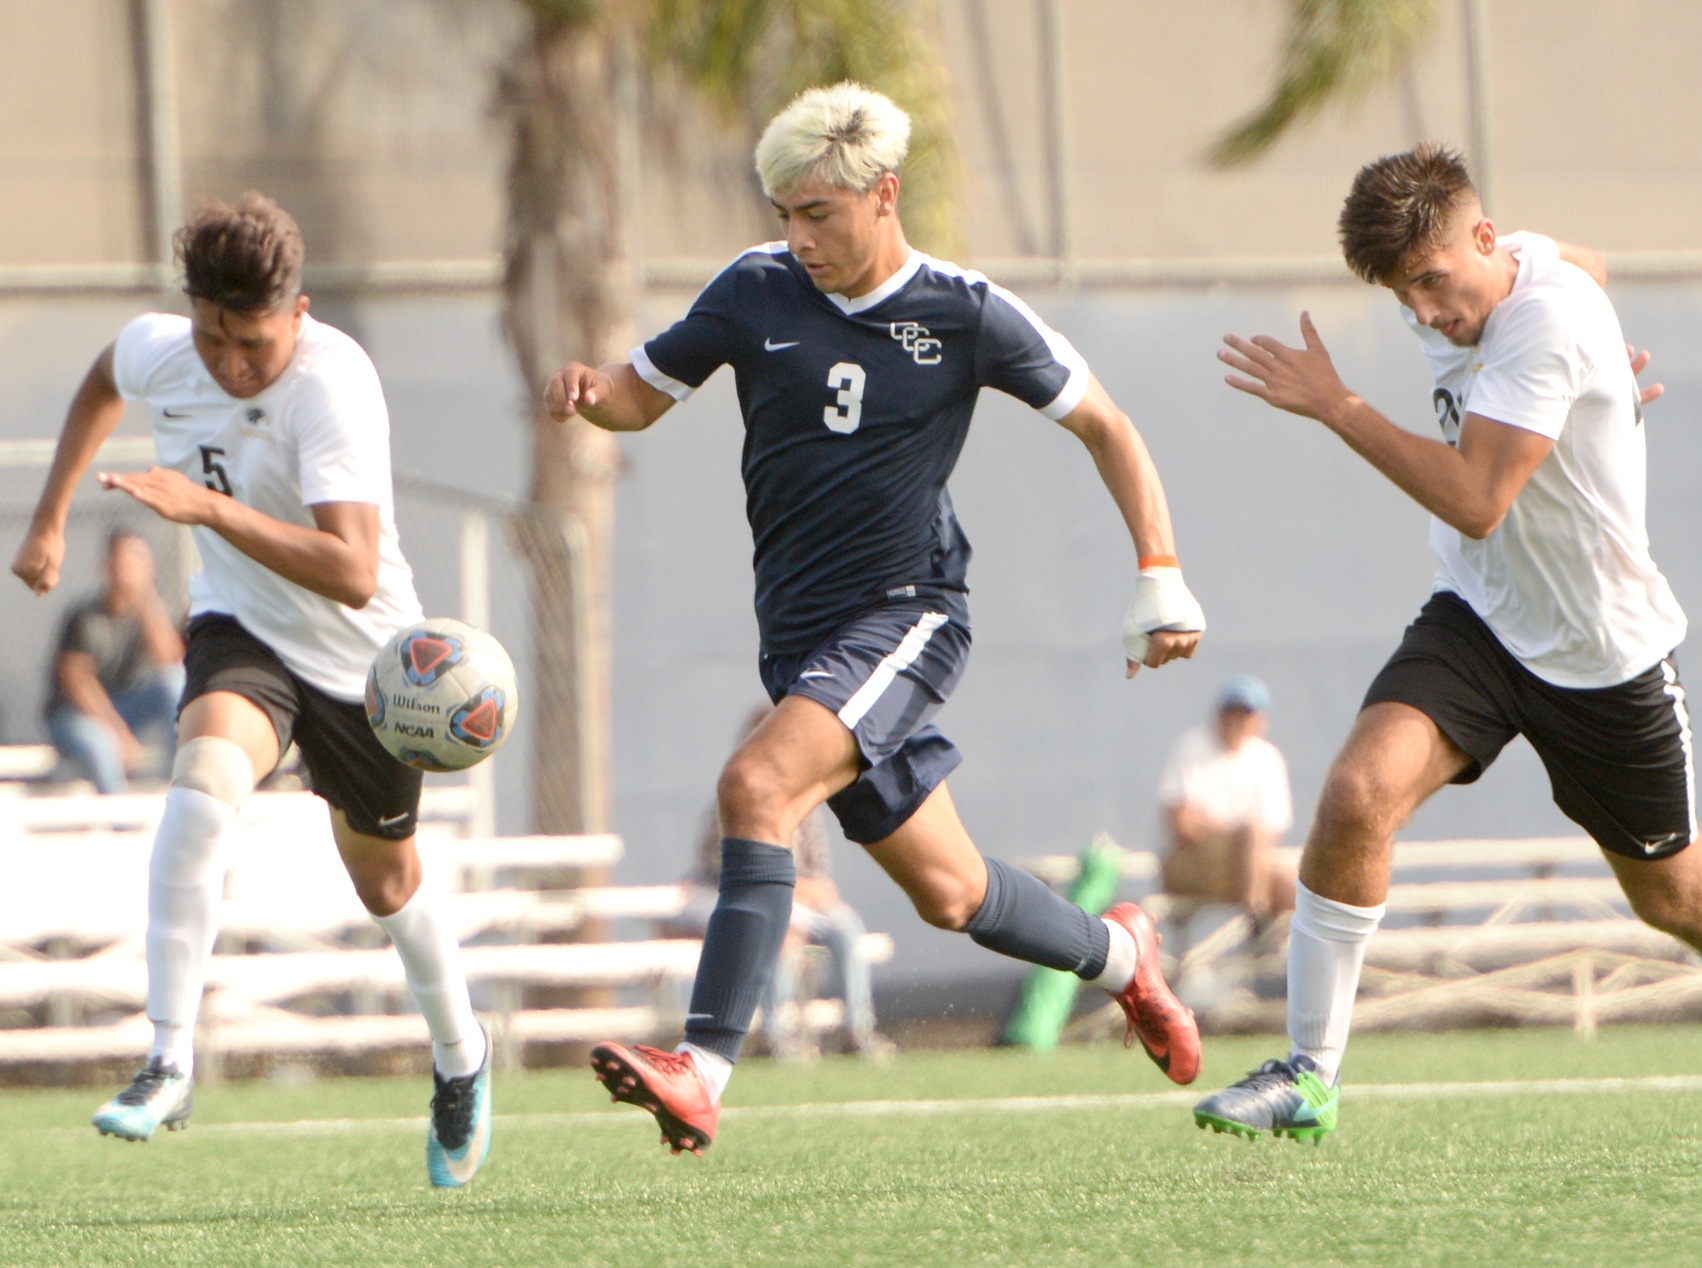 Pirates continue strong play with 3-0 win over Irvine Valley